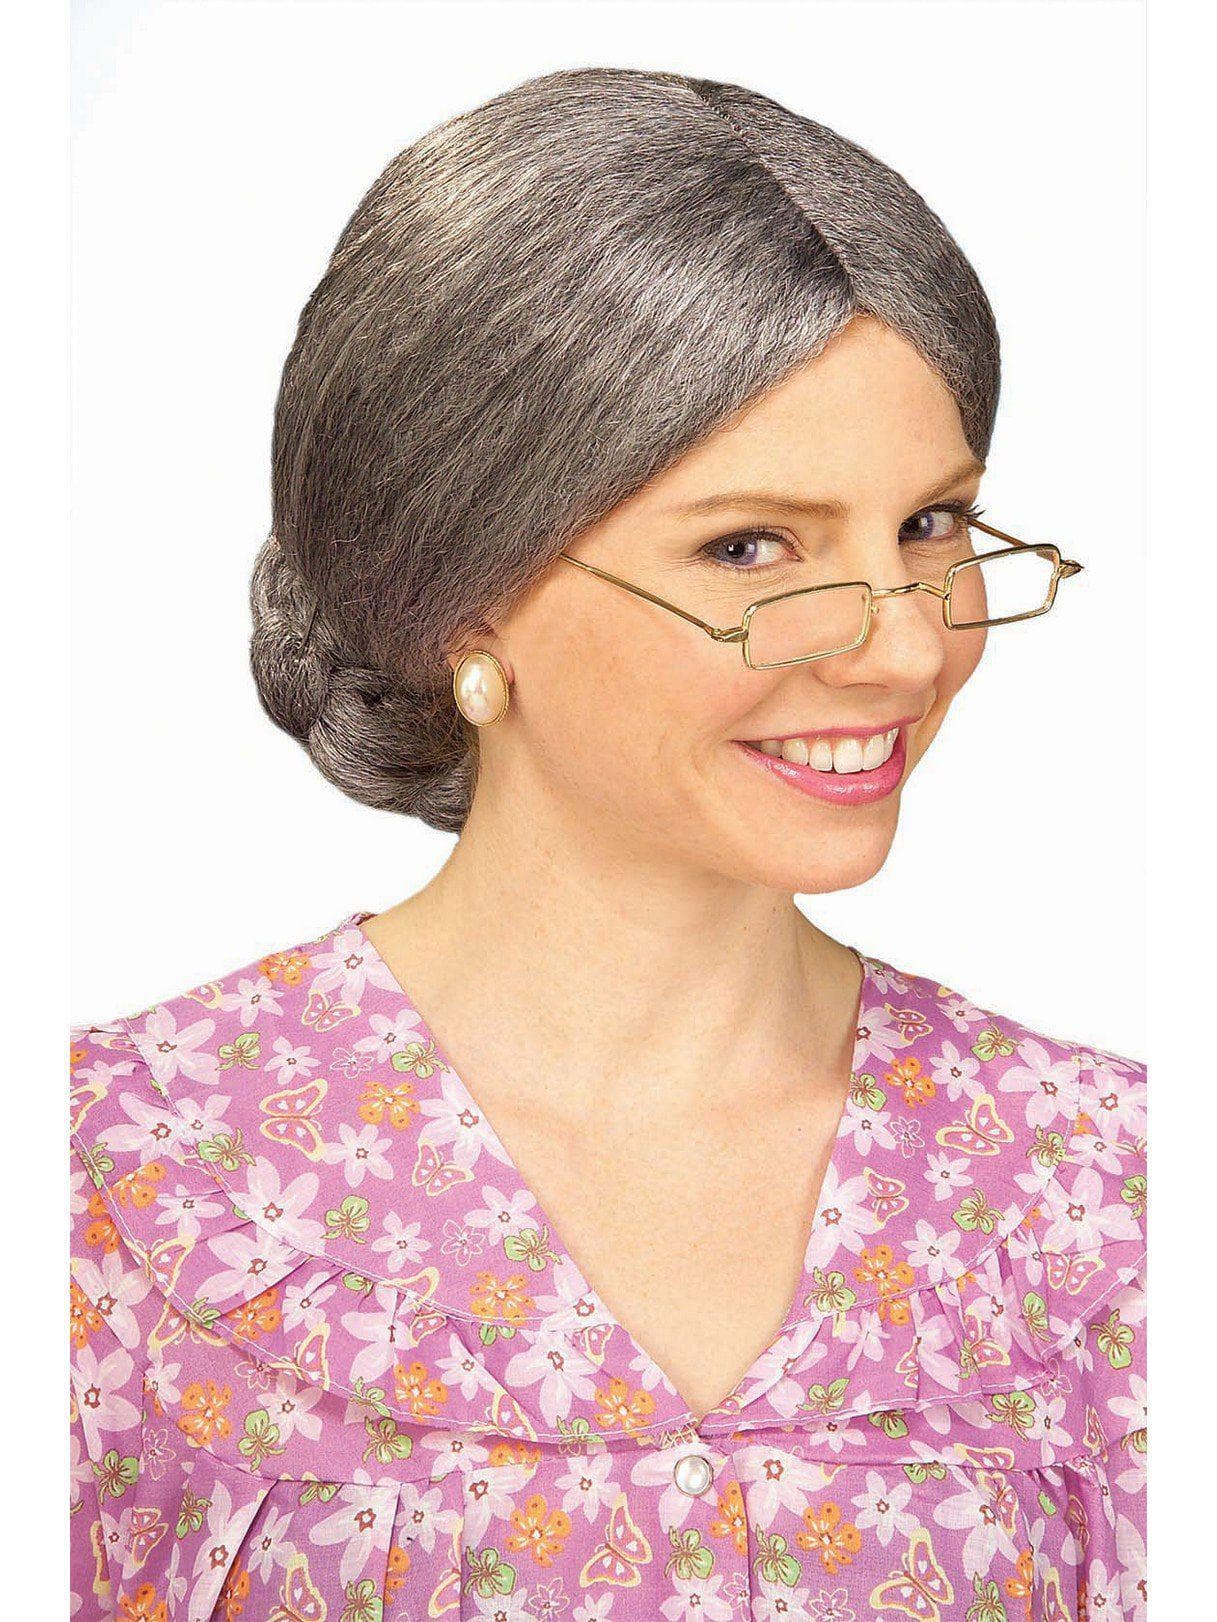 Old Lady Wig with Bun - costumes.com